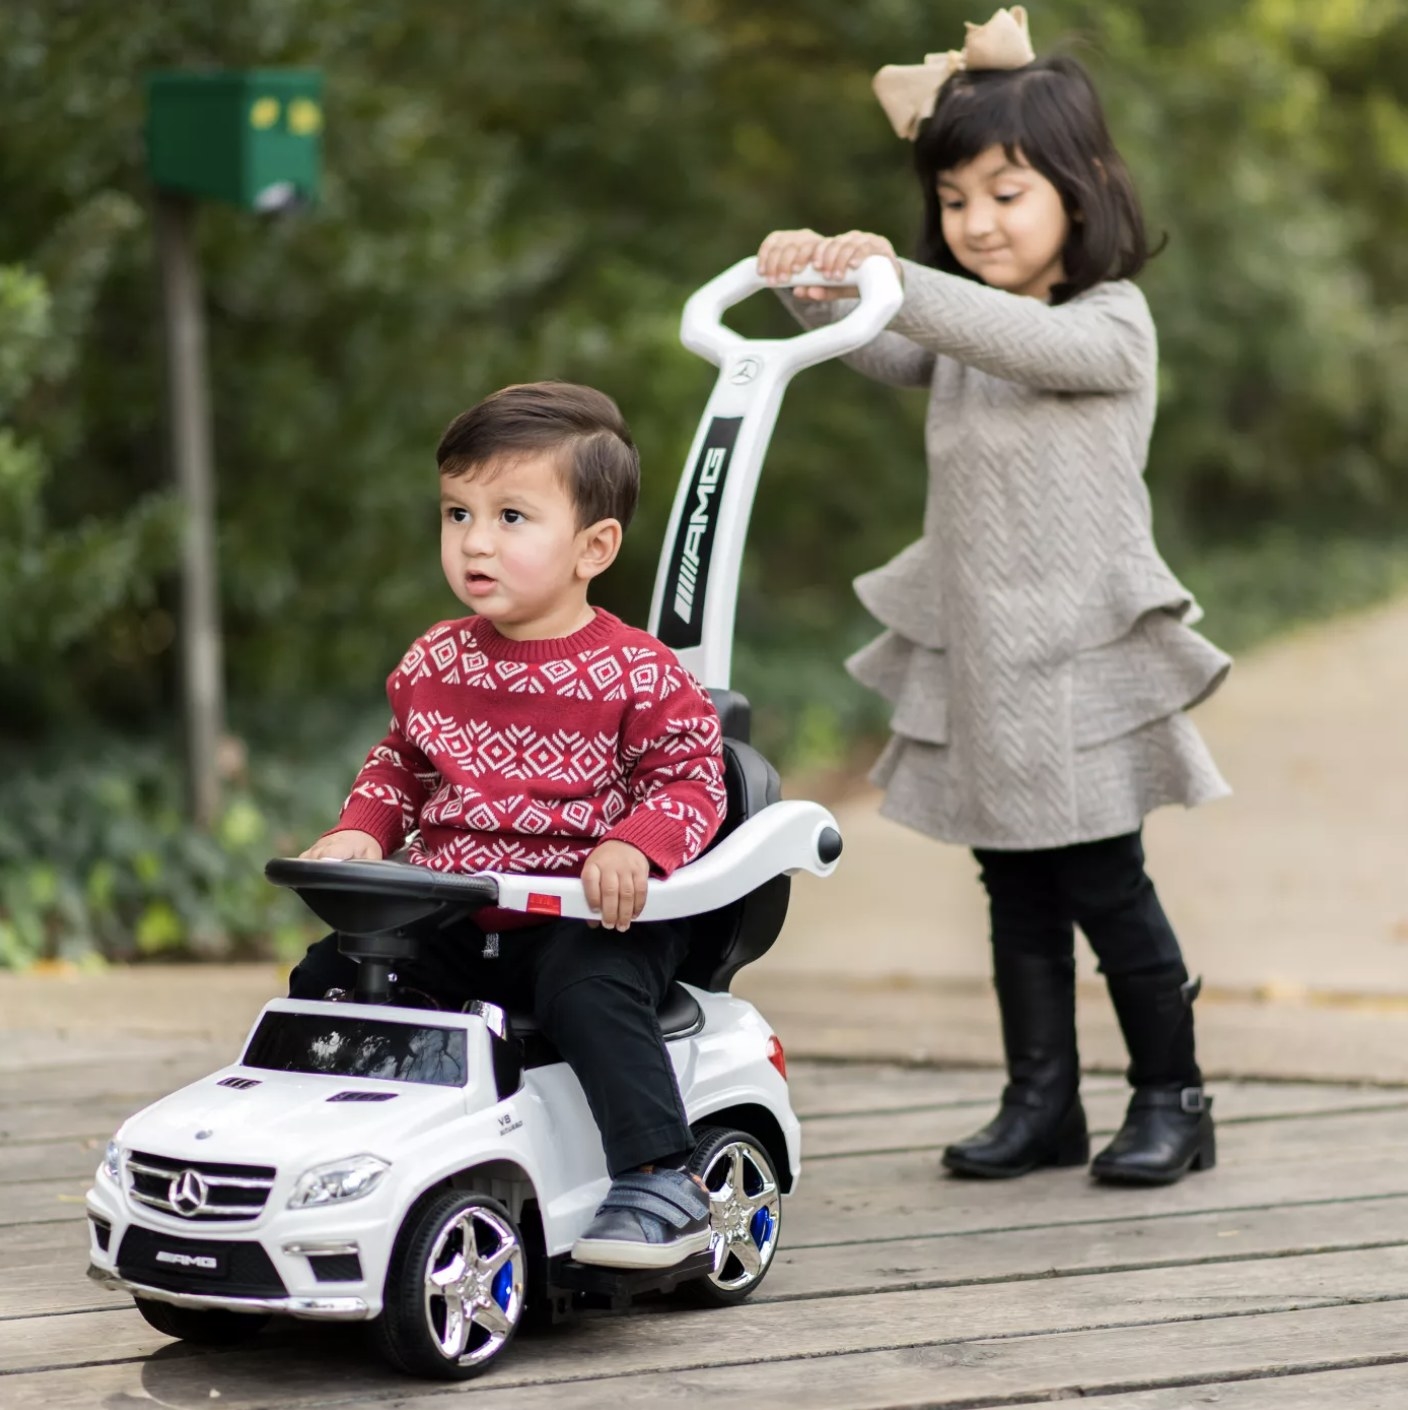 A child pushing another child on a push stroller shaped like a white car